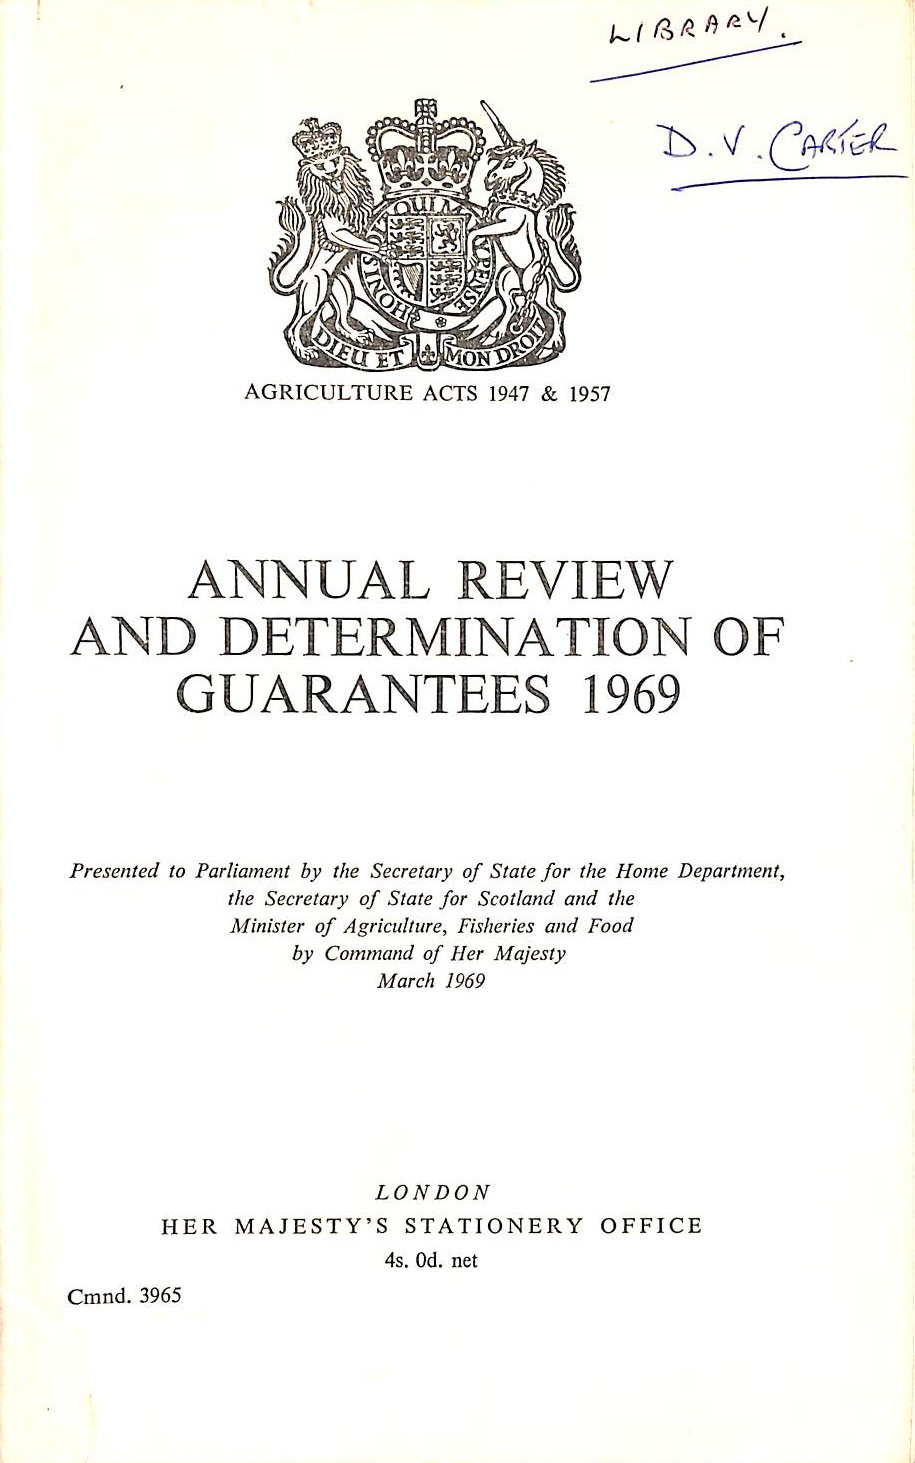 GREAT BRITAIN,HOME OFFICE; GREAT BRITAIN,SCOTTISH OFFICE; GREAT BRITAIN,MINISTRY OF AGRICULTURE, FISHERIES, AND FOOD - Annual Review and Determination of Guarantees 1969 (Cmnd.3965)